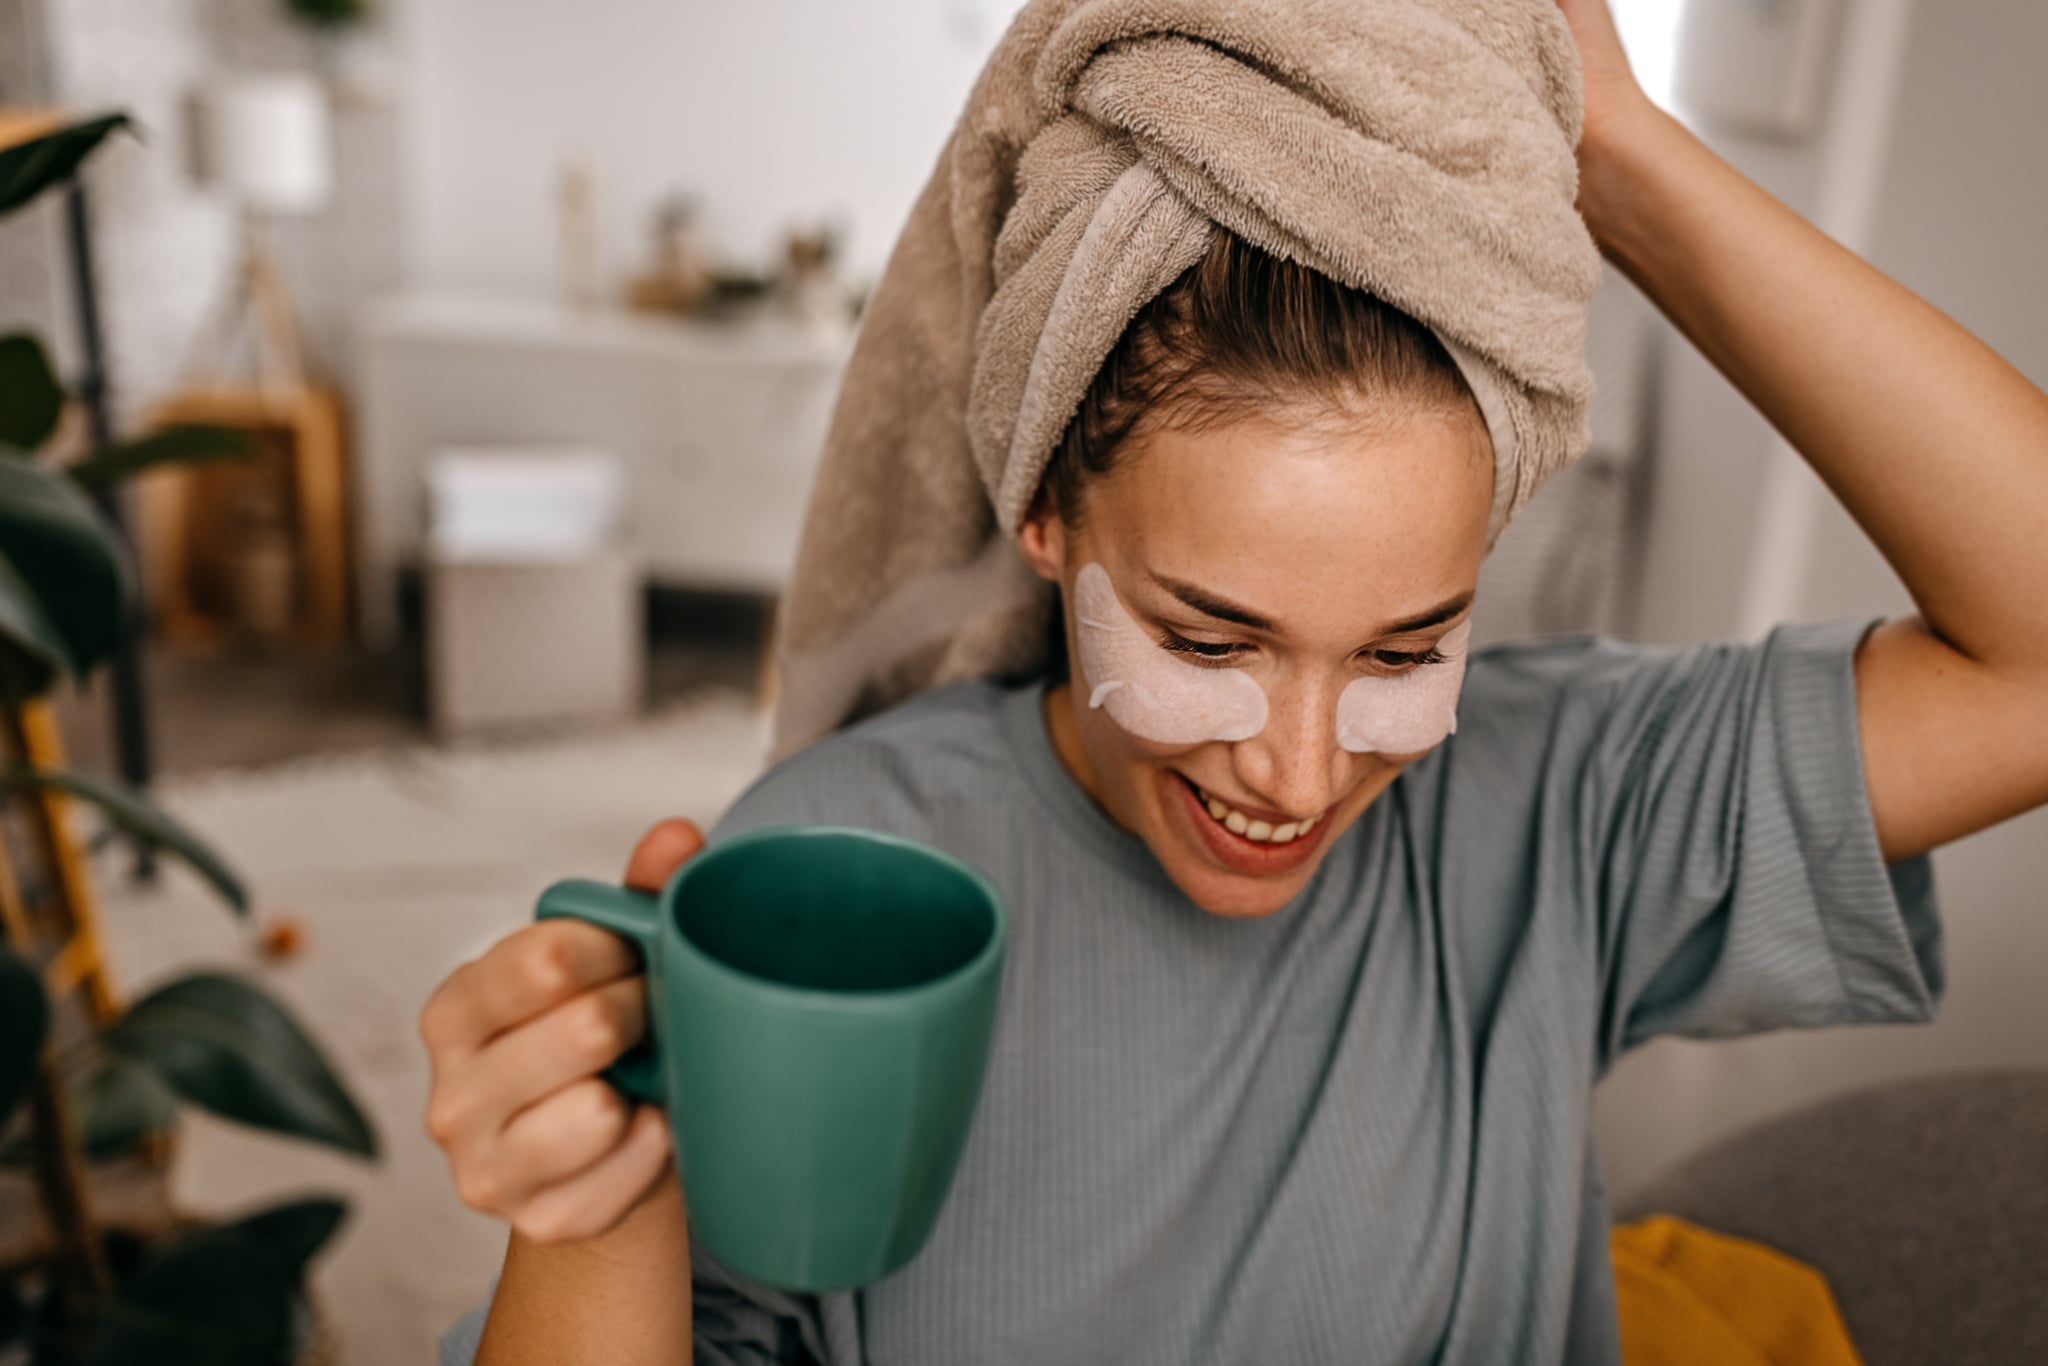 Pretty young woman with healthy skin applying cosmetic patches under eyes drinking coffee after shower with towel on hair looking away